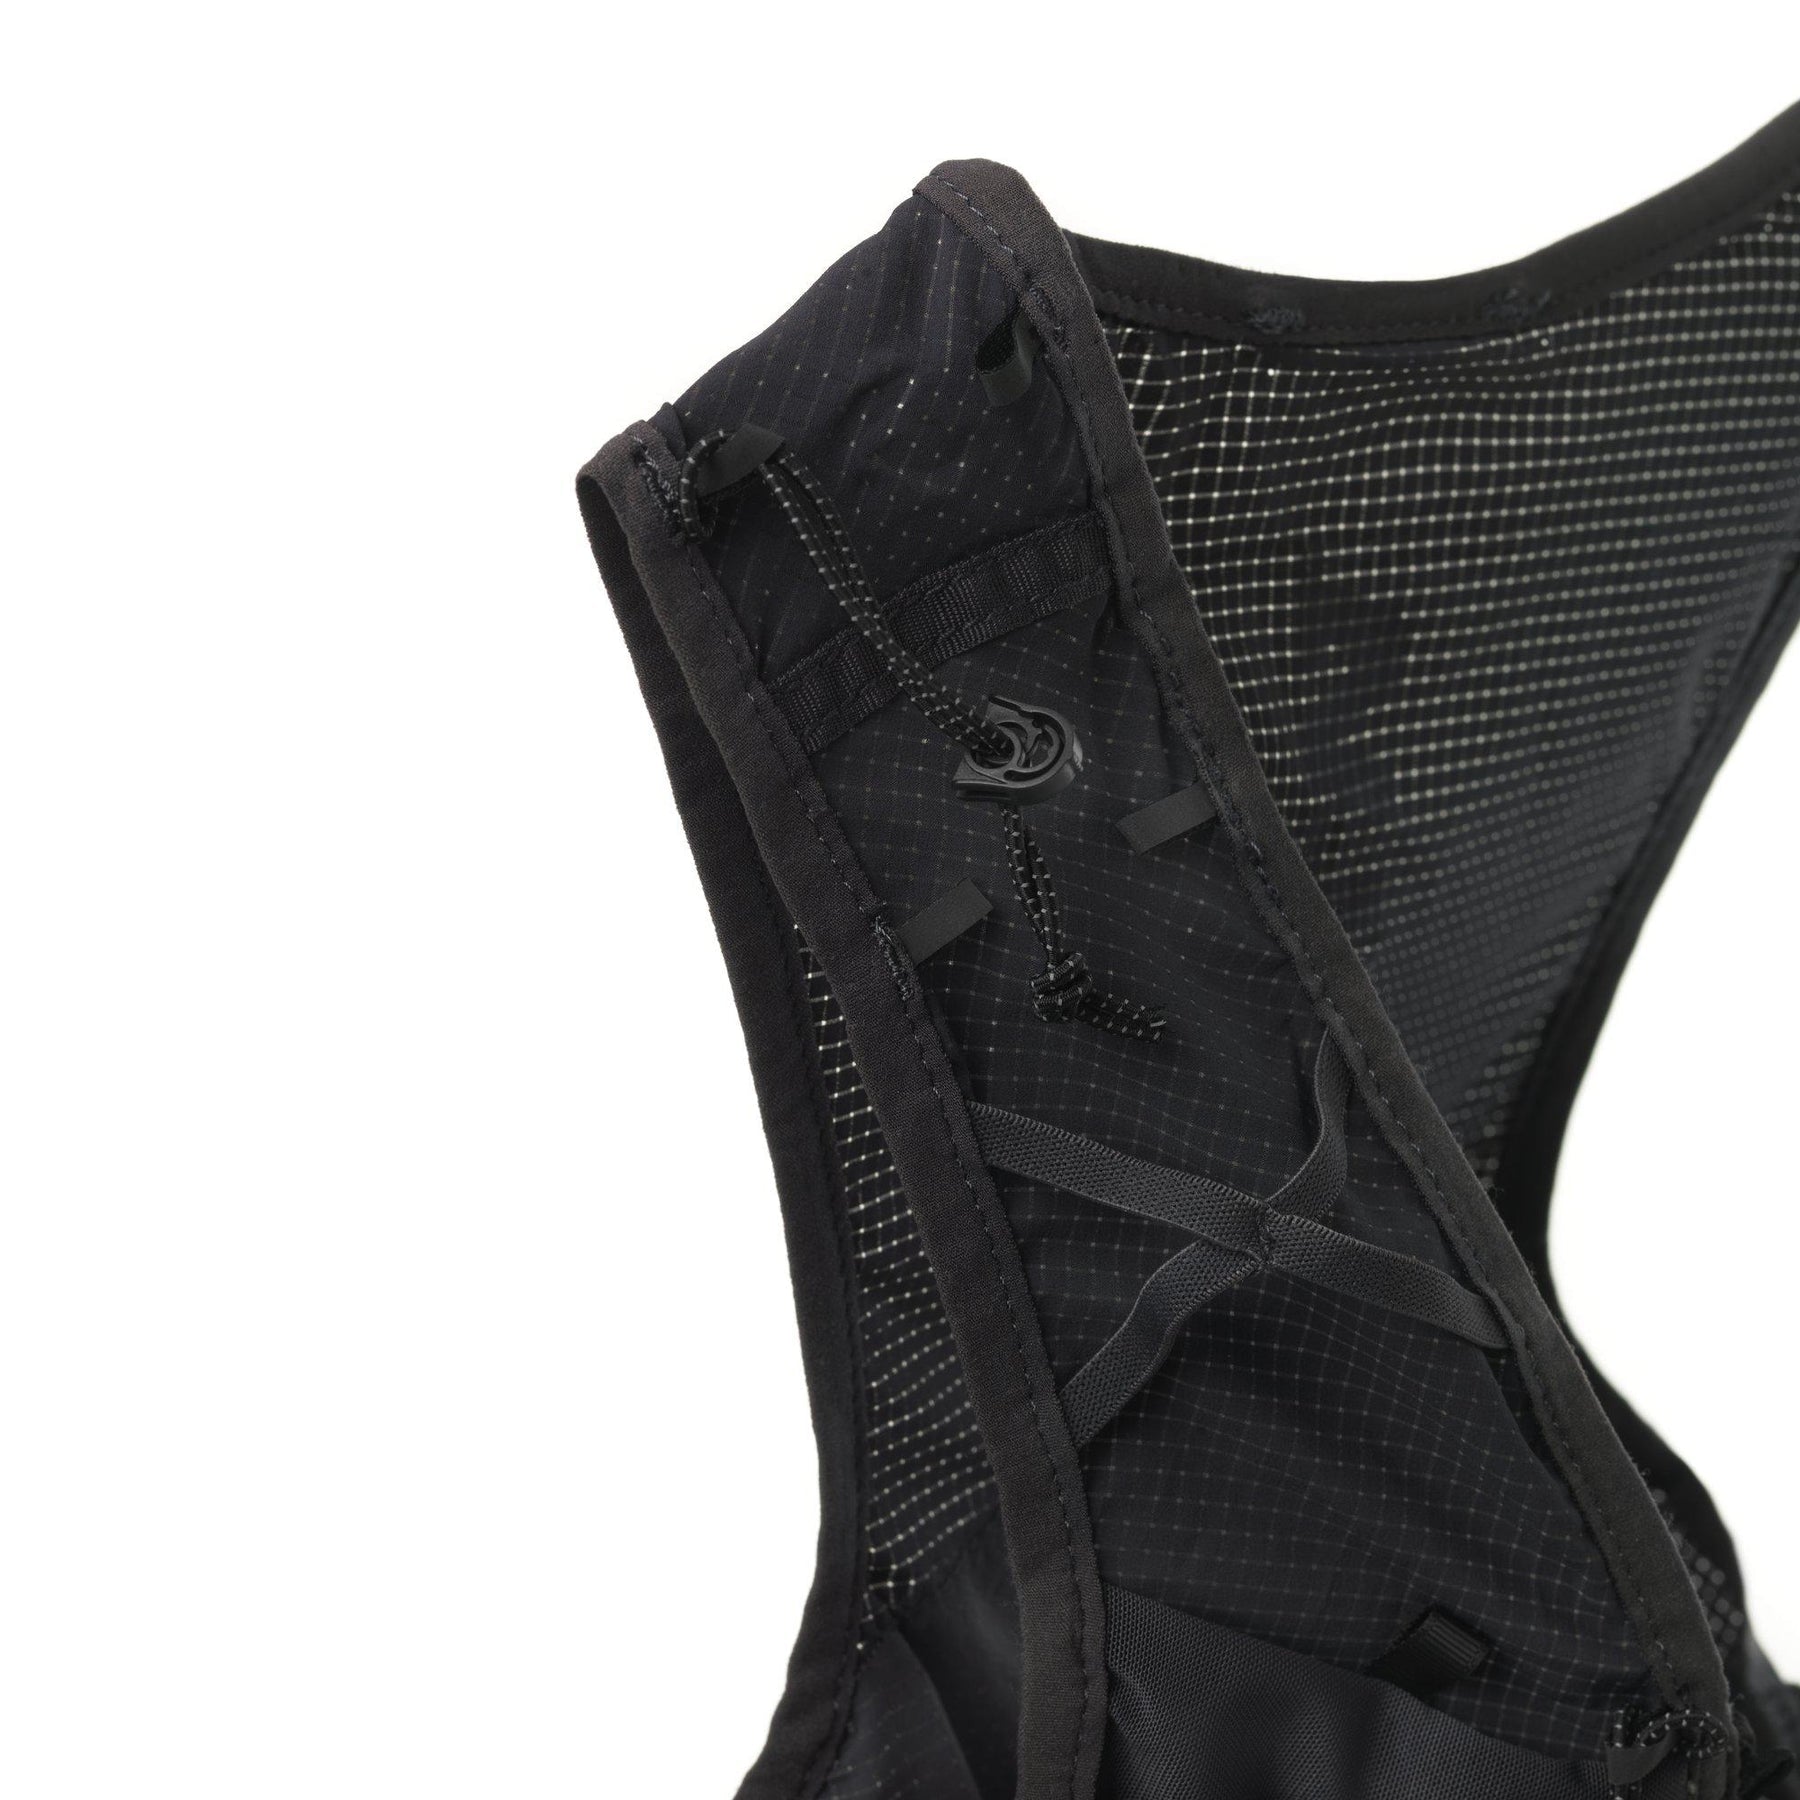 Silva Strive Fly Vest: The Ultimate Lightweight Running Hydration Pack